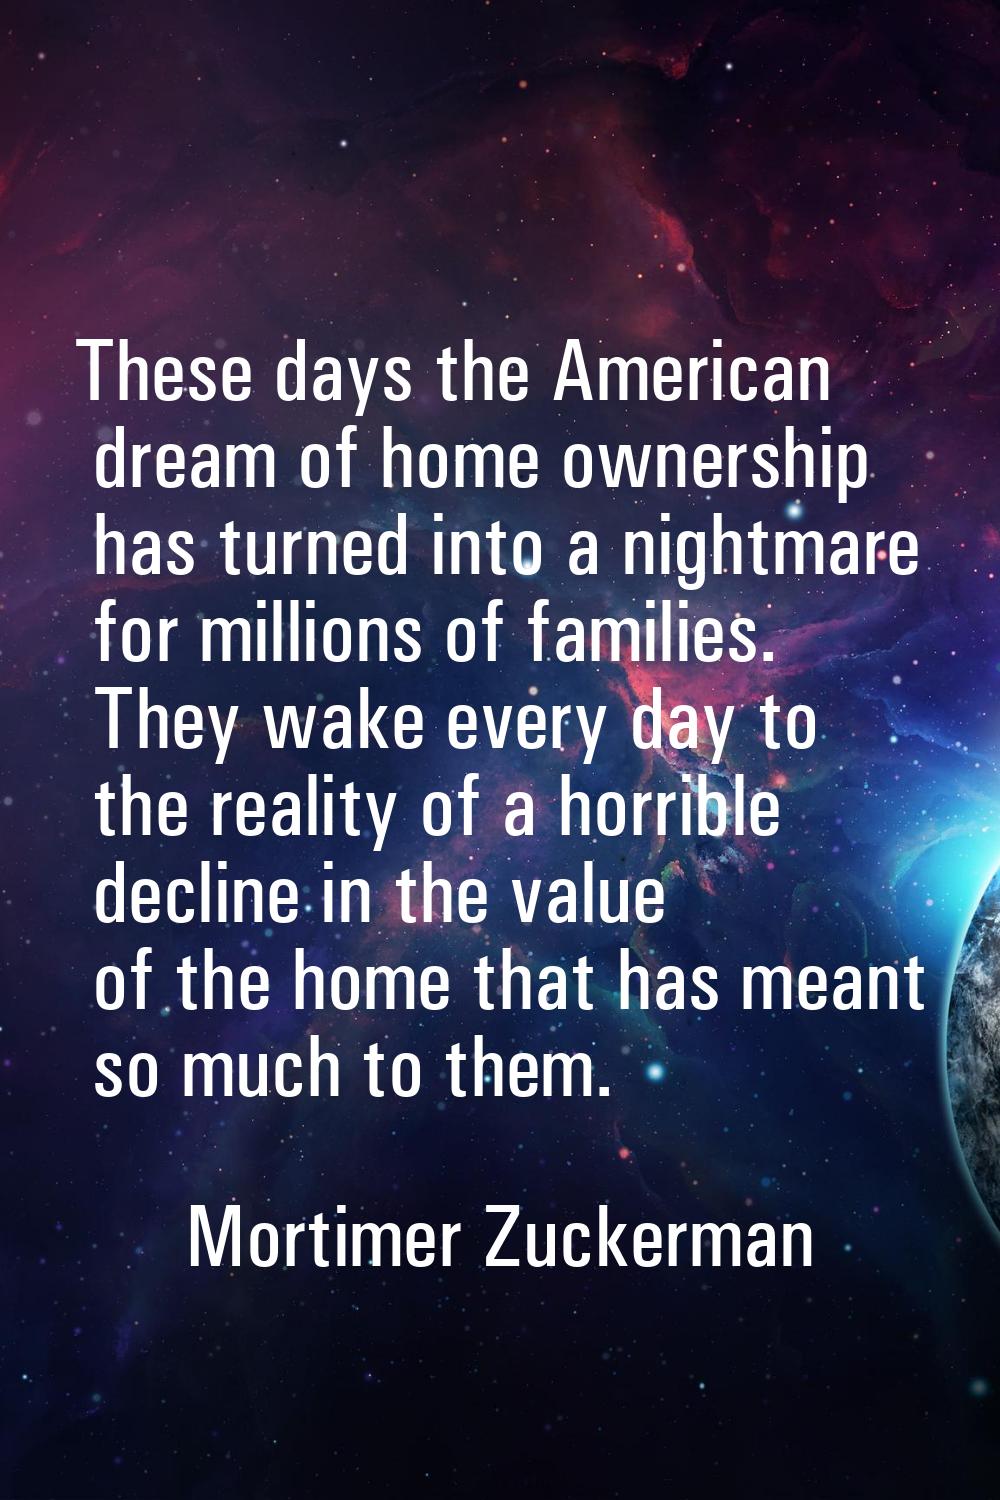 These days the American dream of home ownership has turned into a nightmare for millions of familie